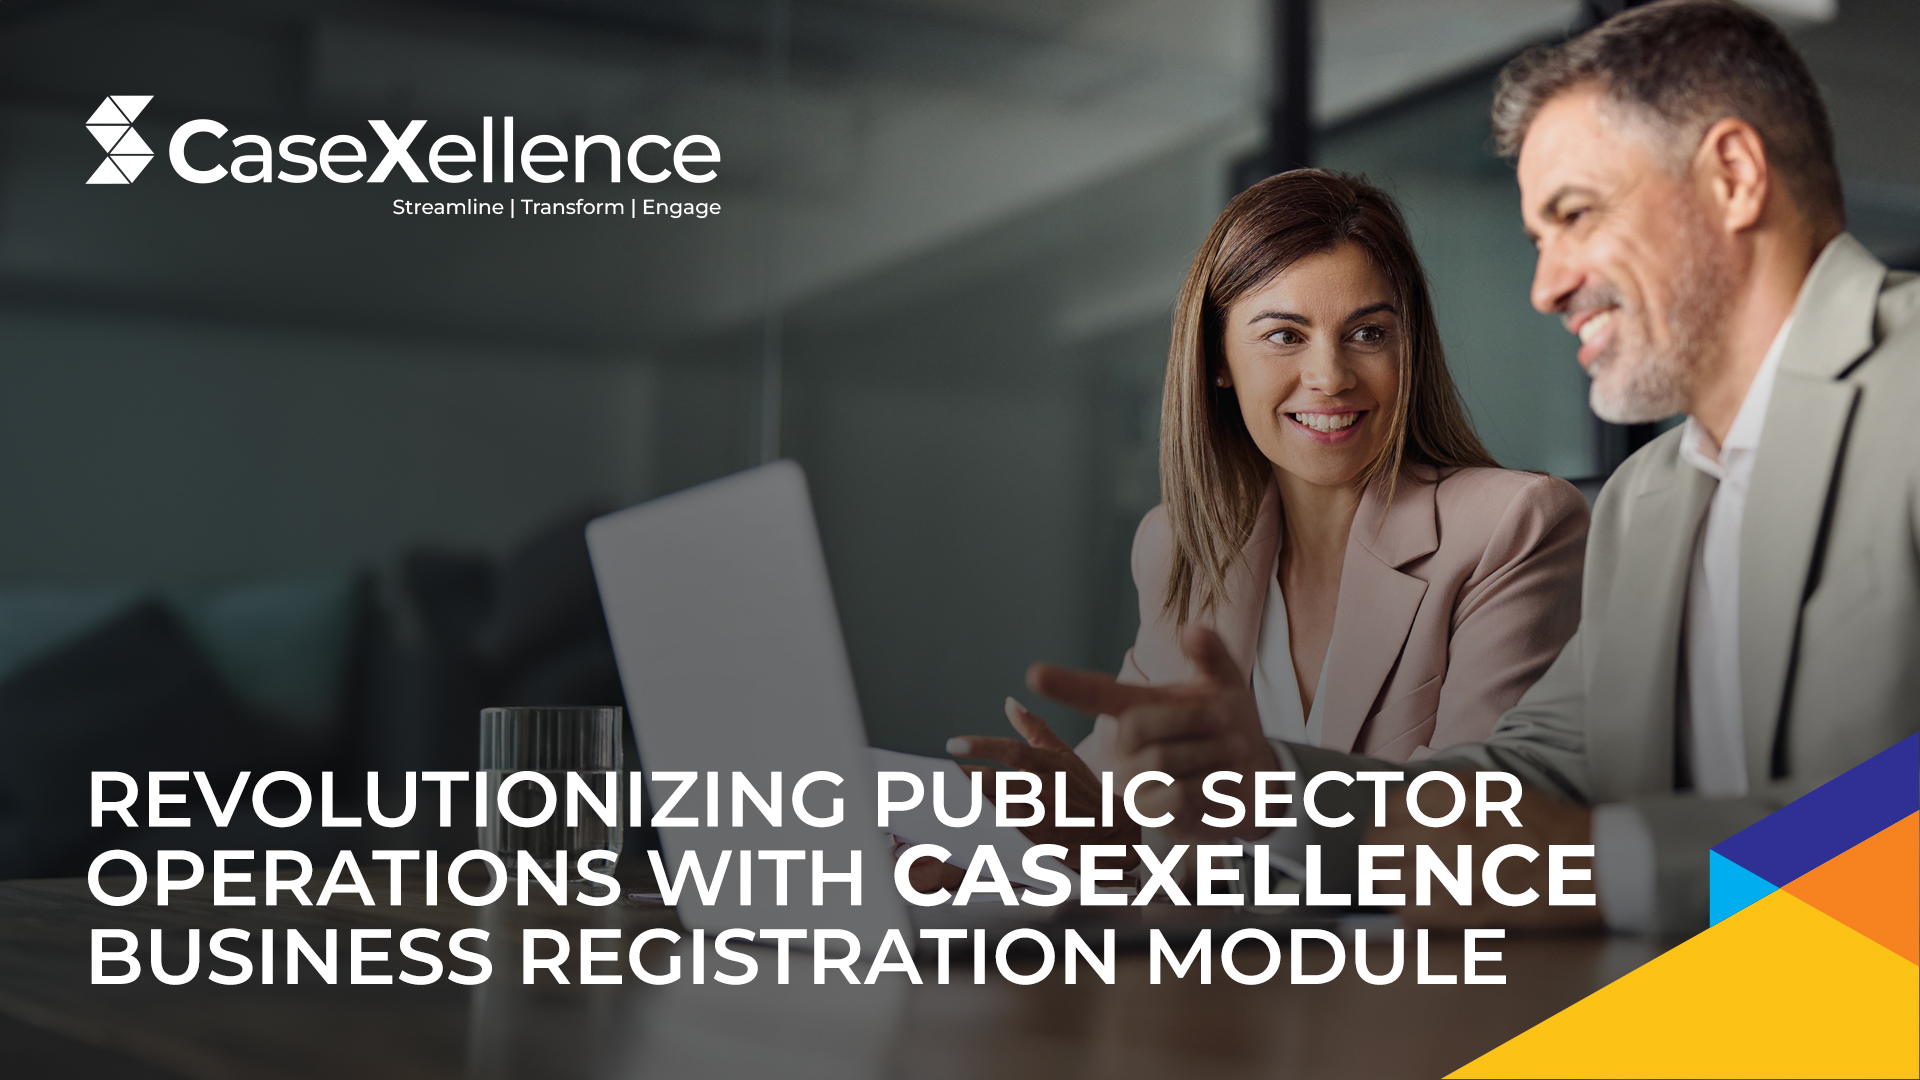 Revolutionizing Public Sector Operations with CaseXellence Business Registration Module